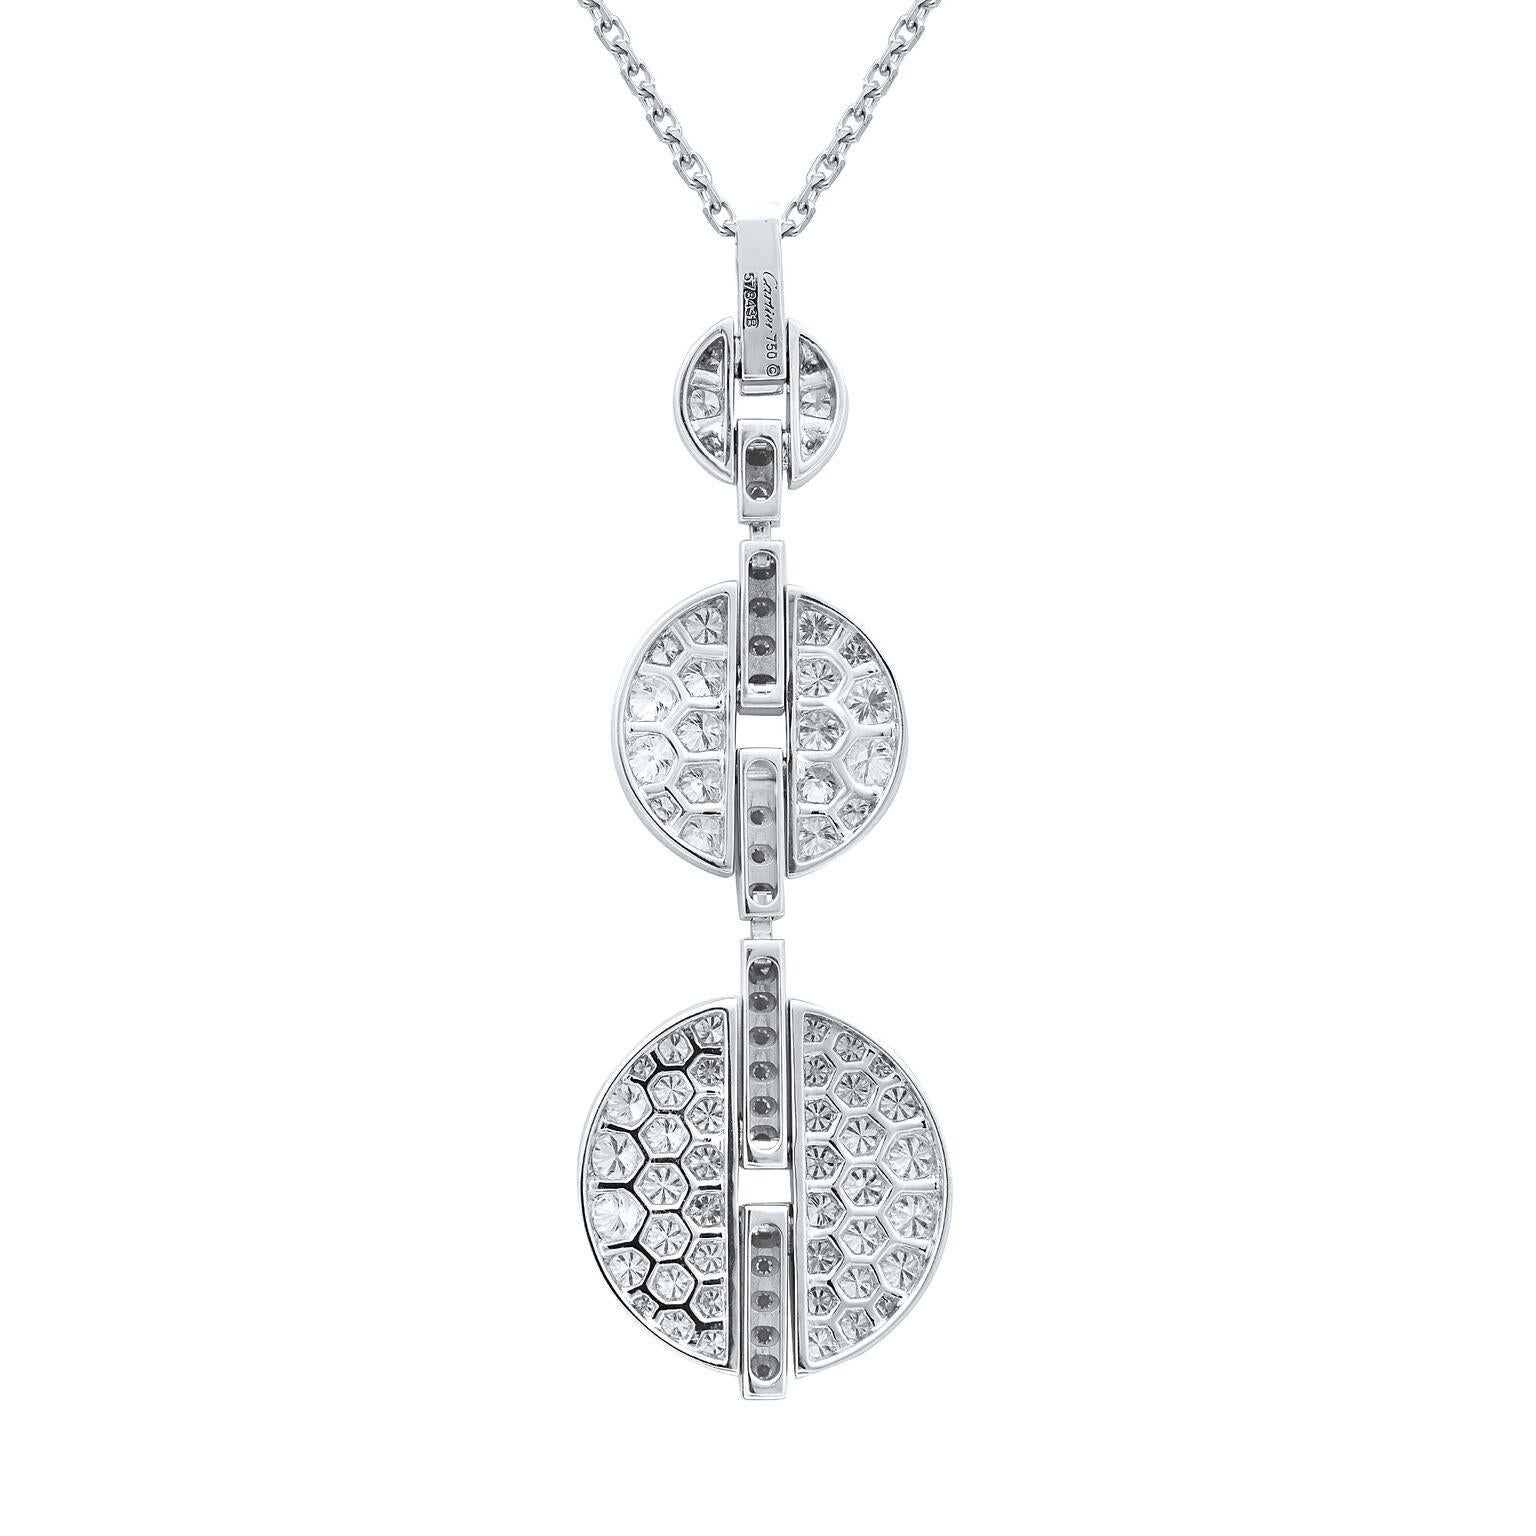 This piece is Cartier's exclusive design from Himalia Collection. This 18K white gold diamond pendant necklace comprises a full diamond triple drop pendant set with a total of 91 round brilliant cut diamonds. Carat weight: 4.55. Chain Length: 15